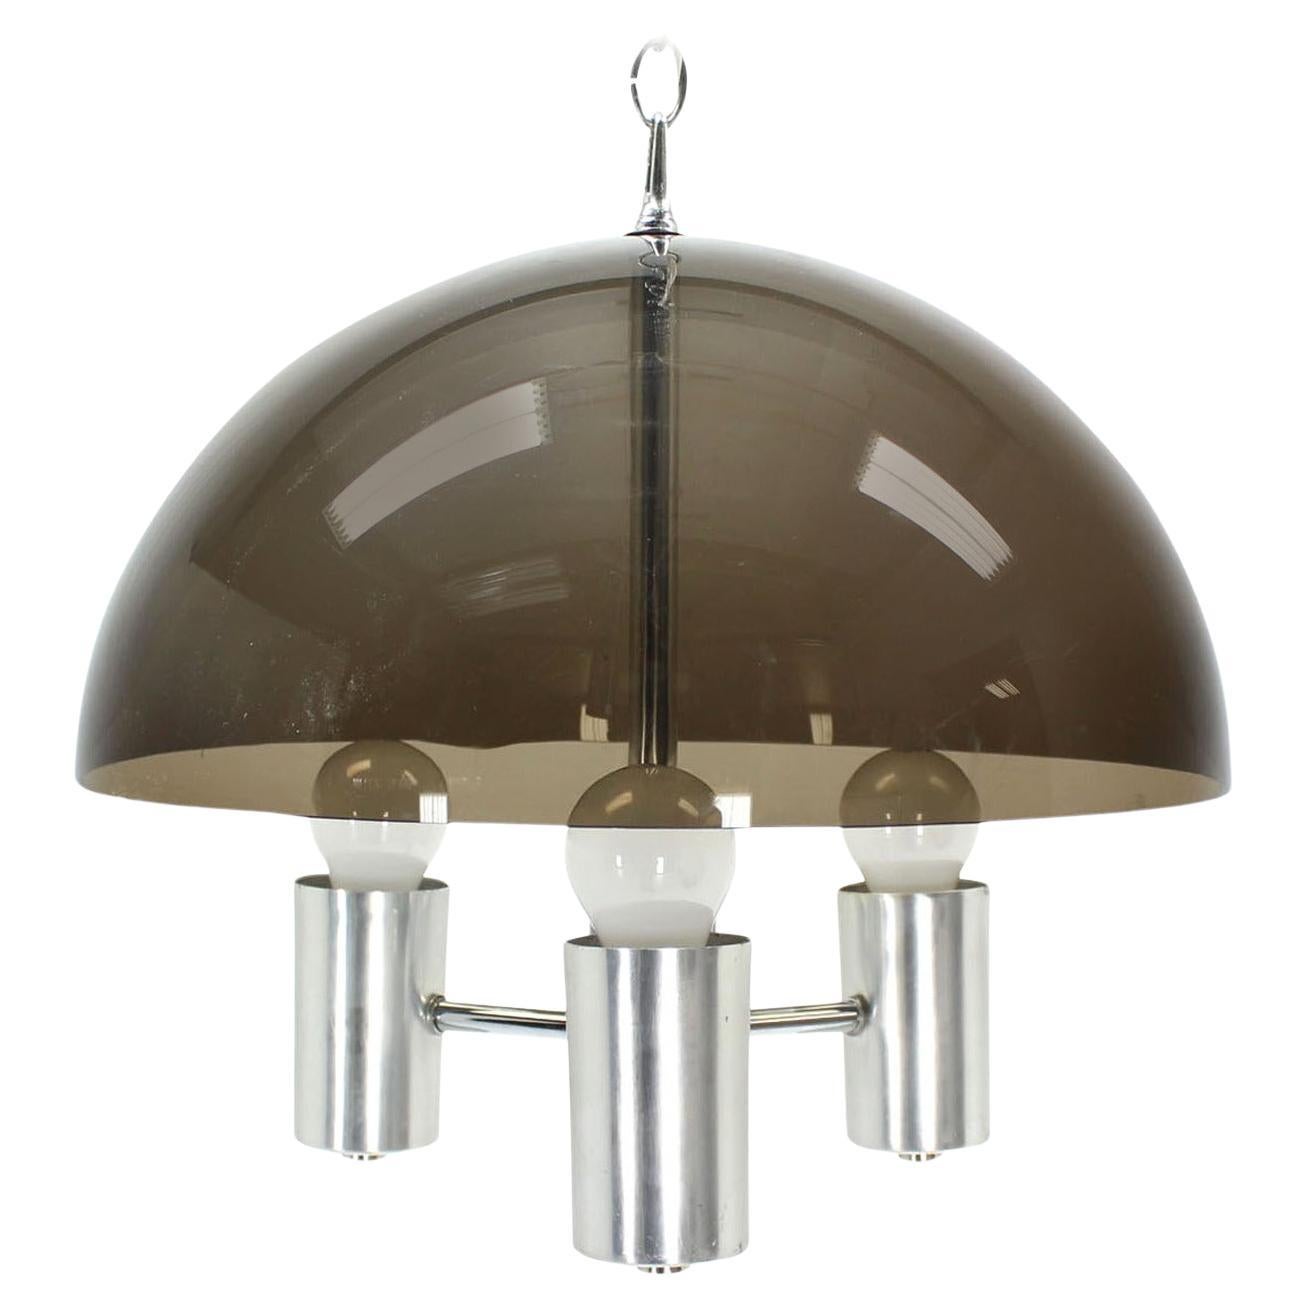 Smoked Lucite Dome Shape Shade Chrome Mid Century Modern 3 Bulb  Light Fixture For Sale